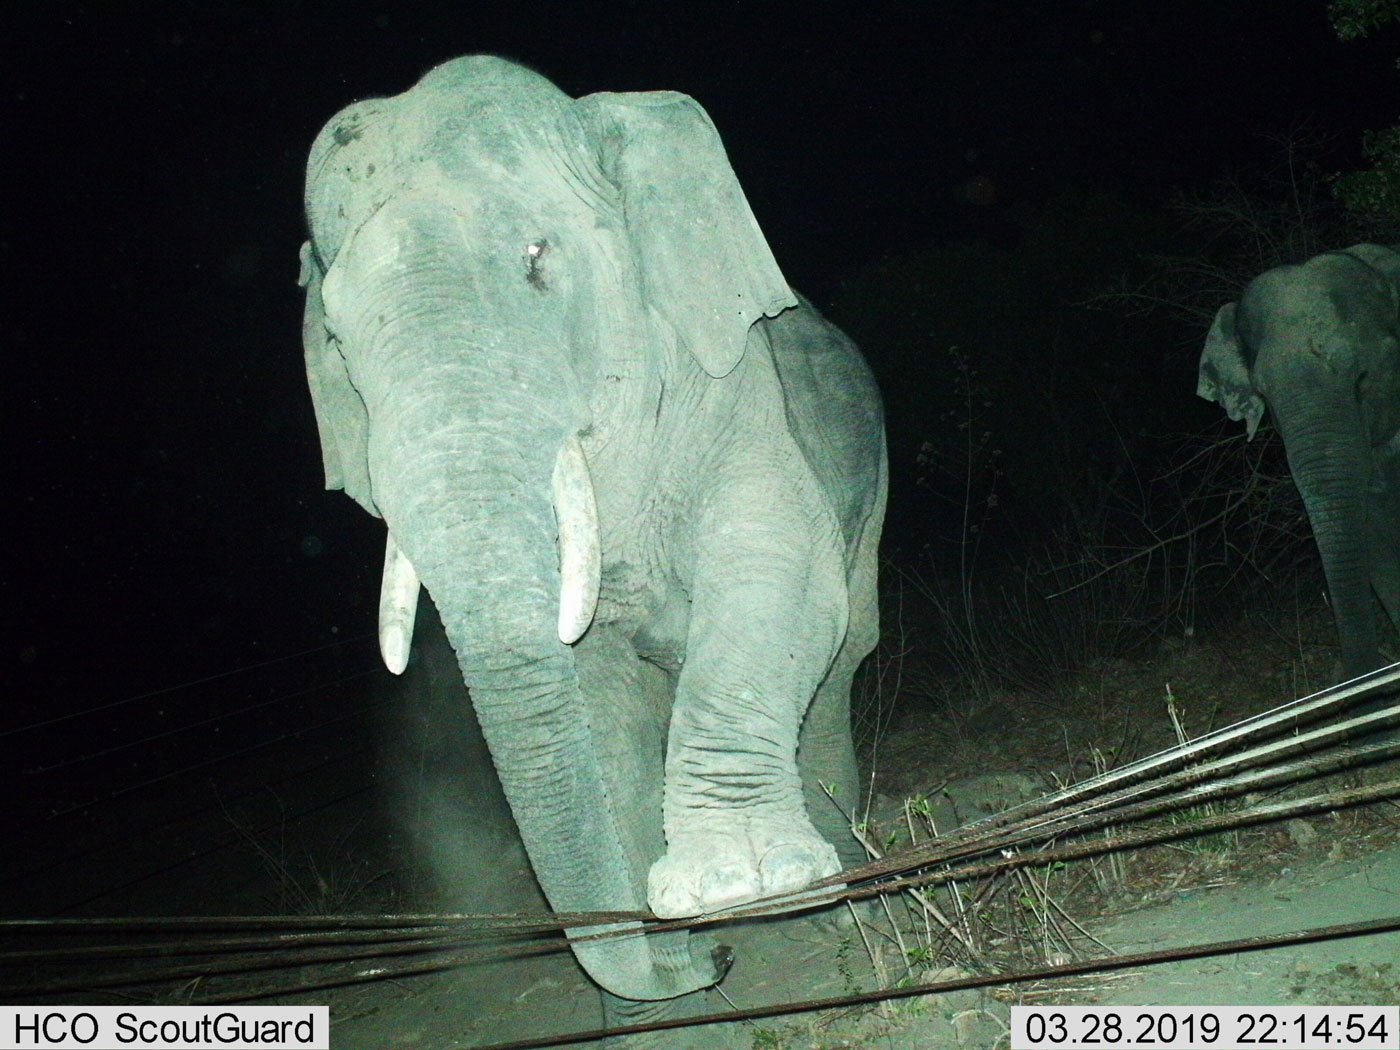 In this photo from 2019, Mottai Vaal is seen crossing the elephant fence while the younger Makhna watches from behind